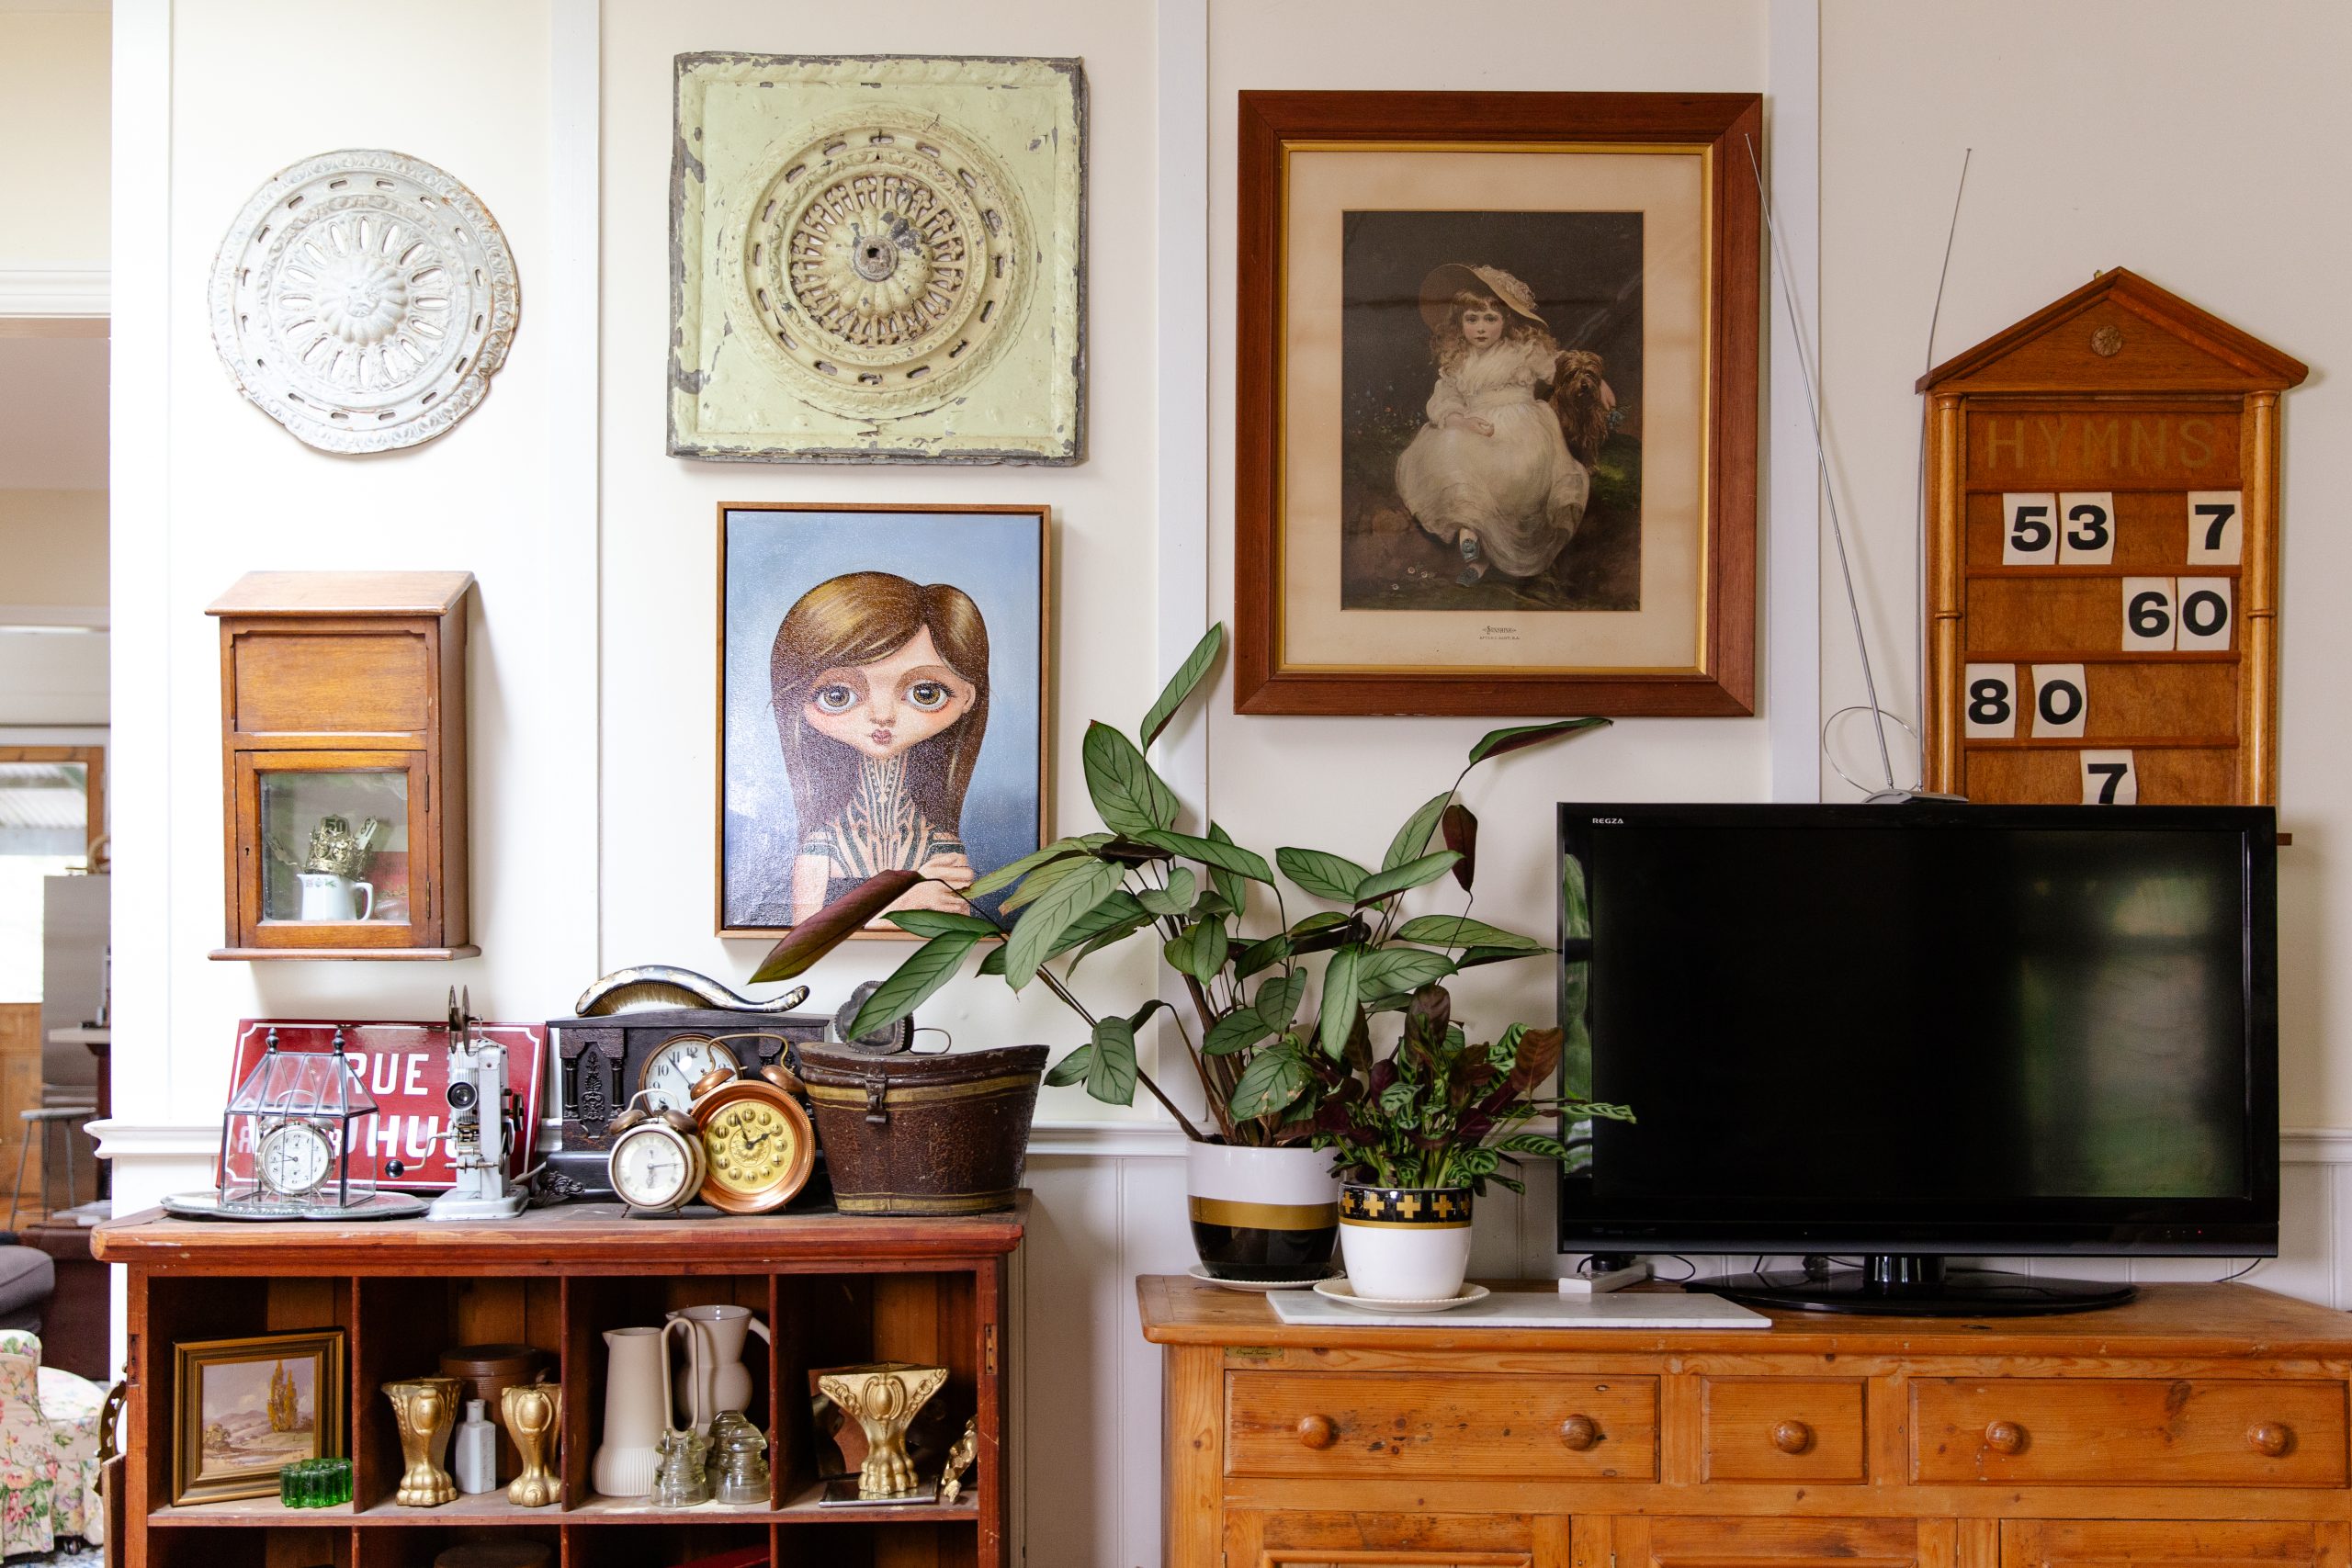 A room in Alicia's home with artwork on the wall and furniture covered with antique items.